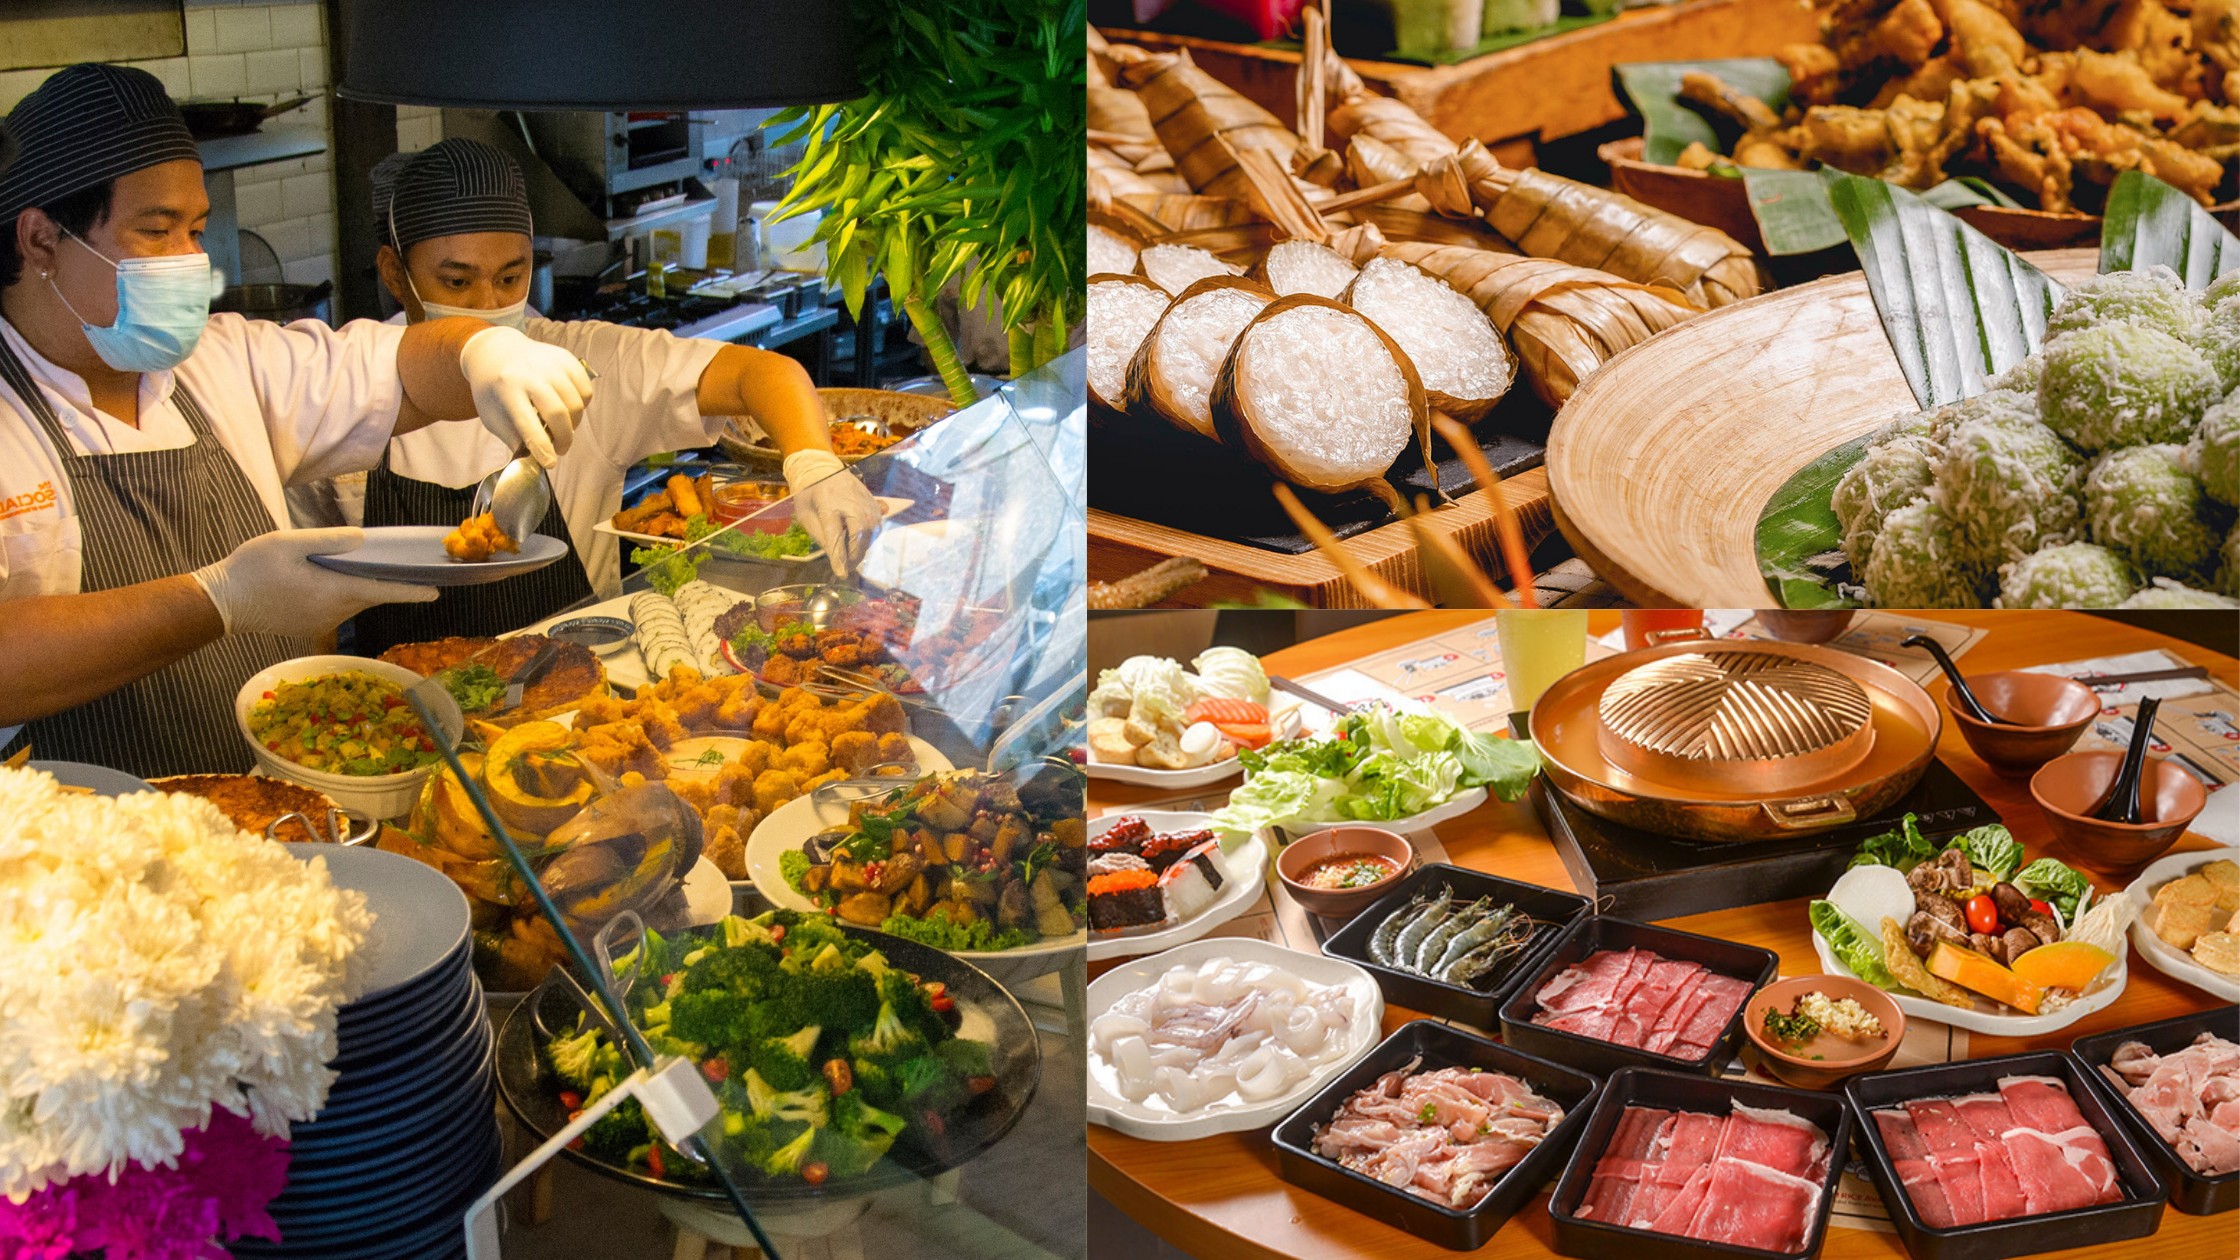 20 Best Halal Buffets In Kl Pj 2021 All You Can Eat Dinner Hi Tea Lunch Buffets Klook Travel Blogklook Travel